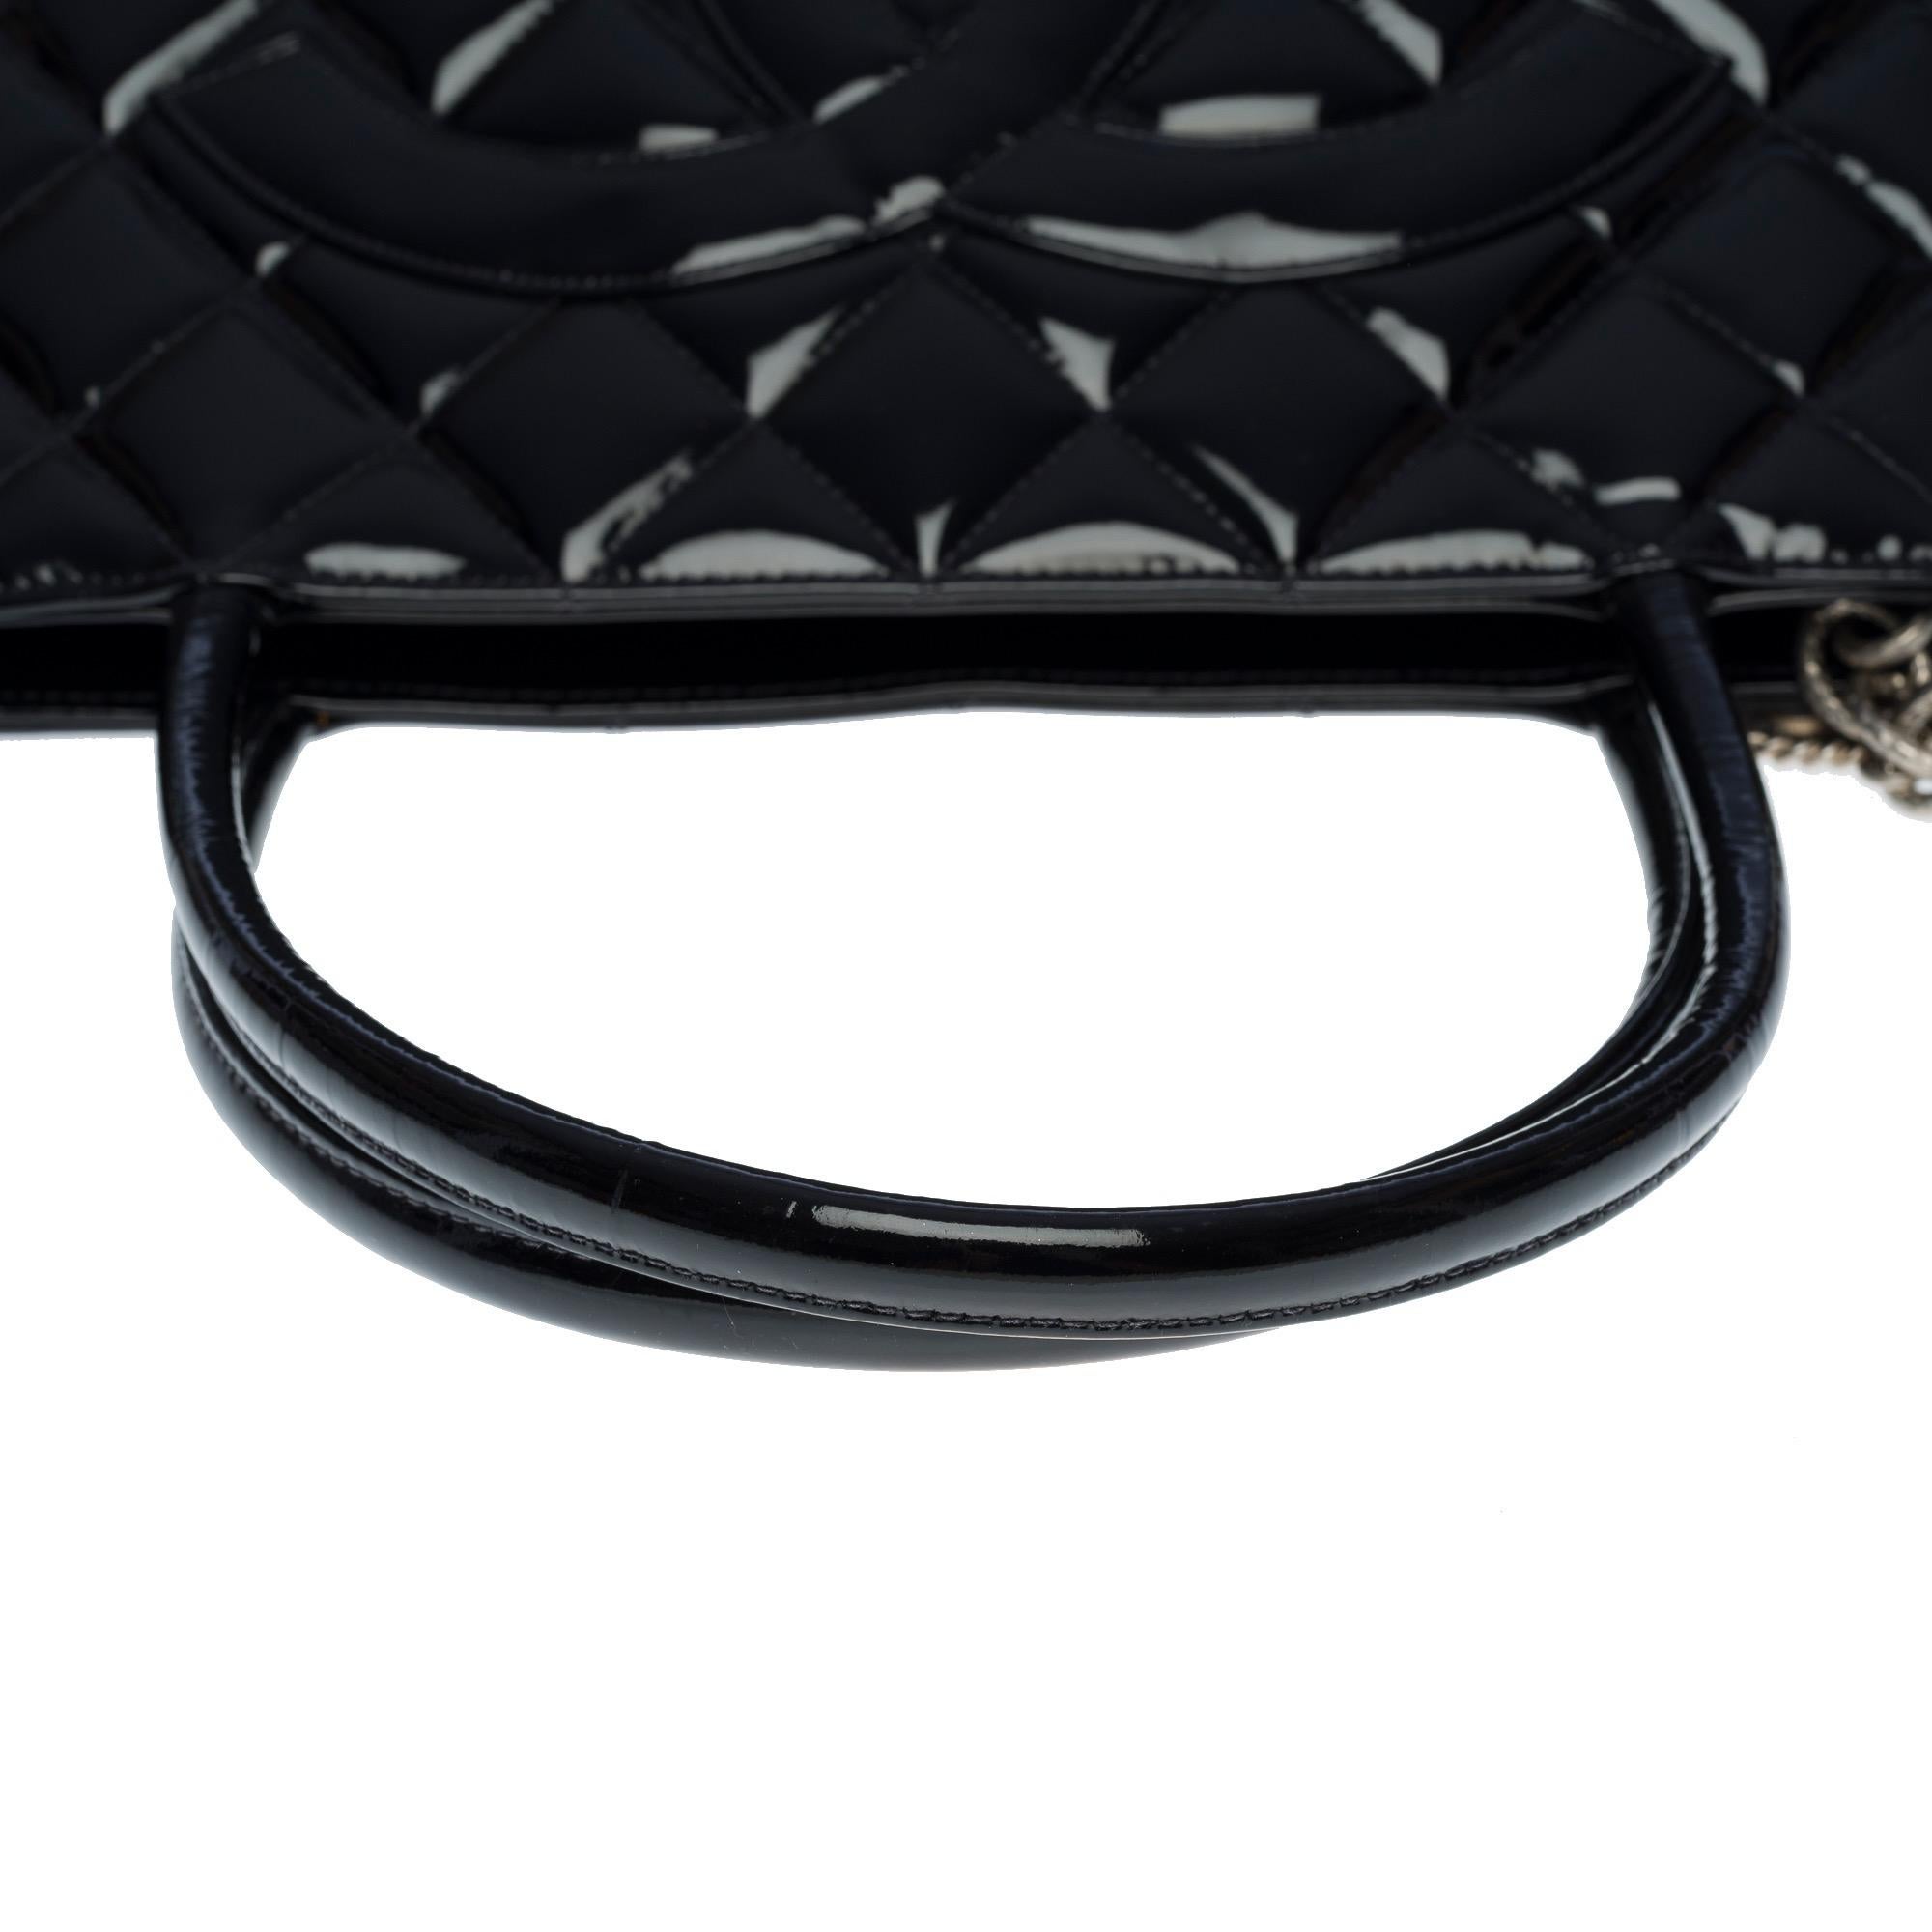 Beautiful Chanel Cabas Medallion bag in black patent leather, SHW For Sale 3